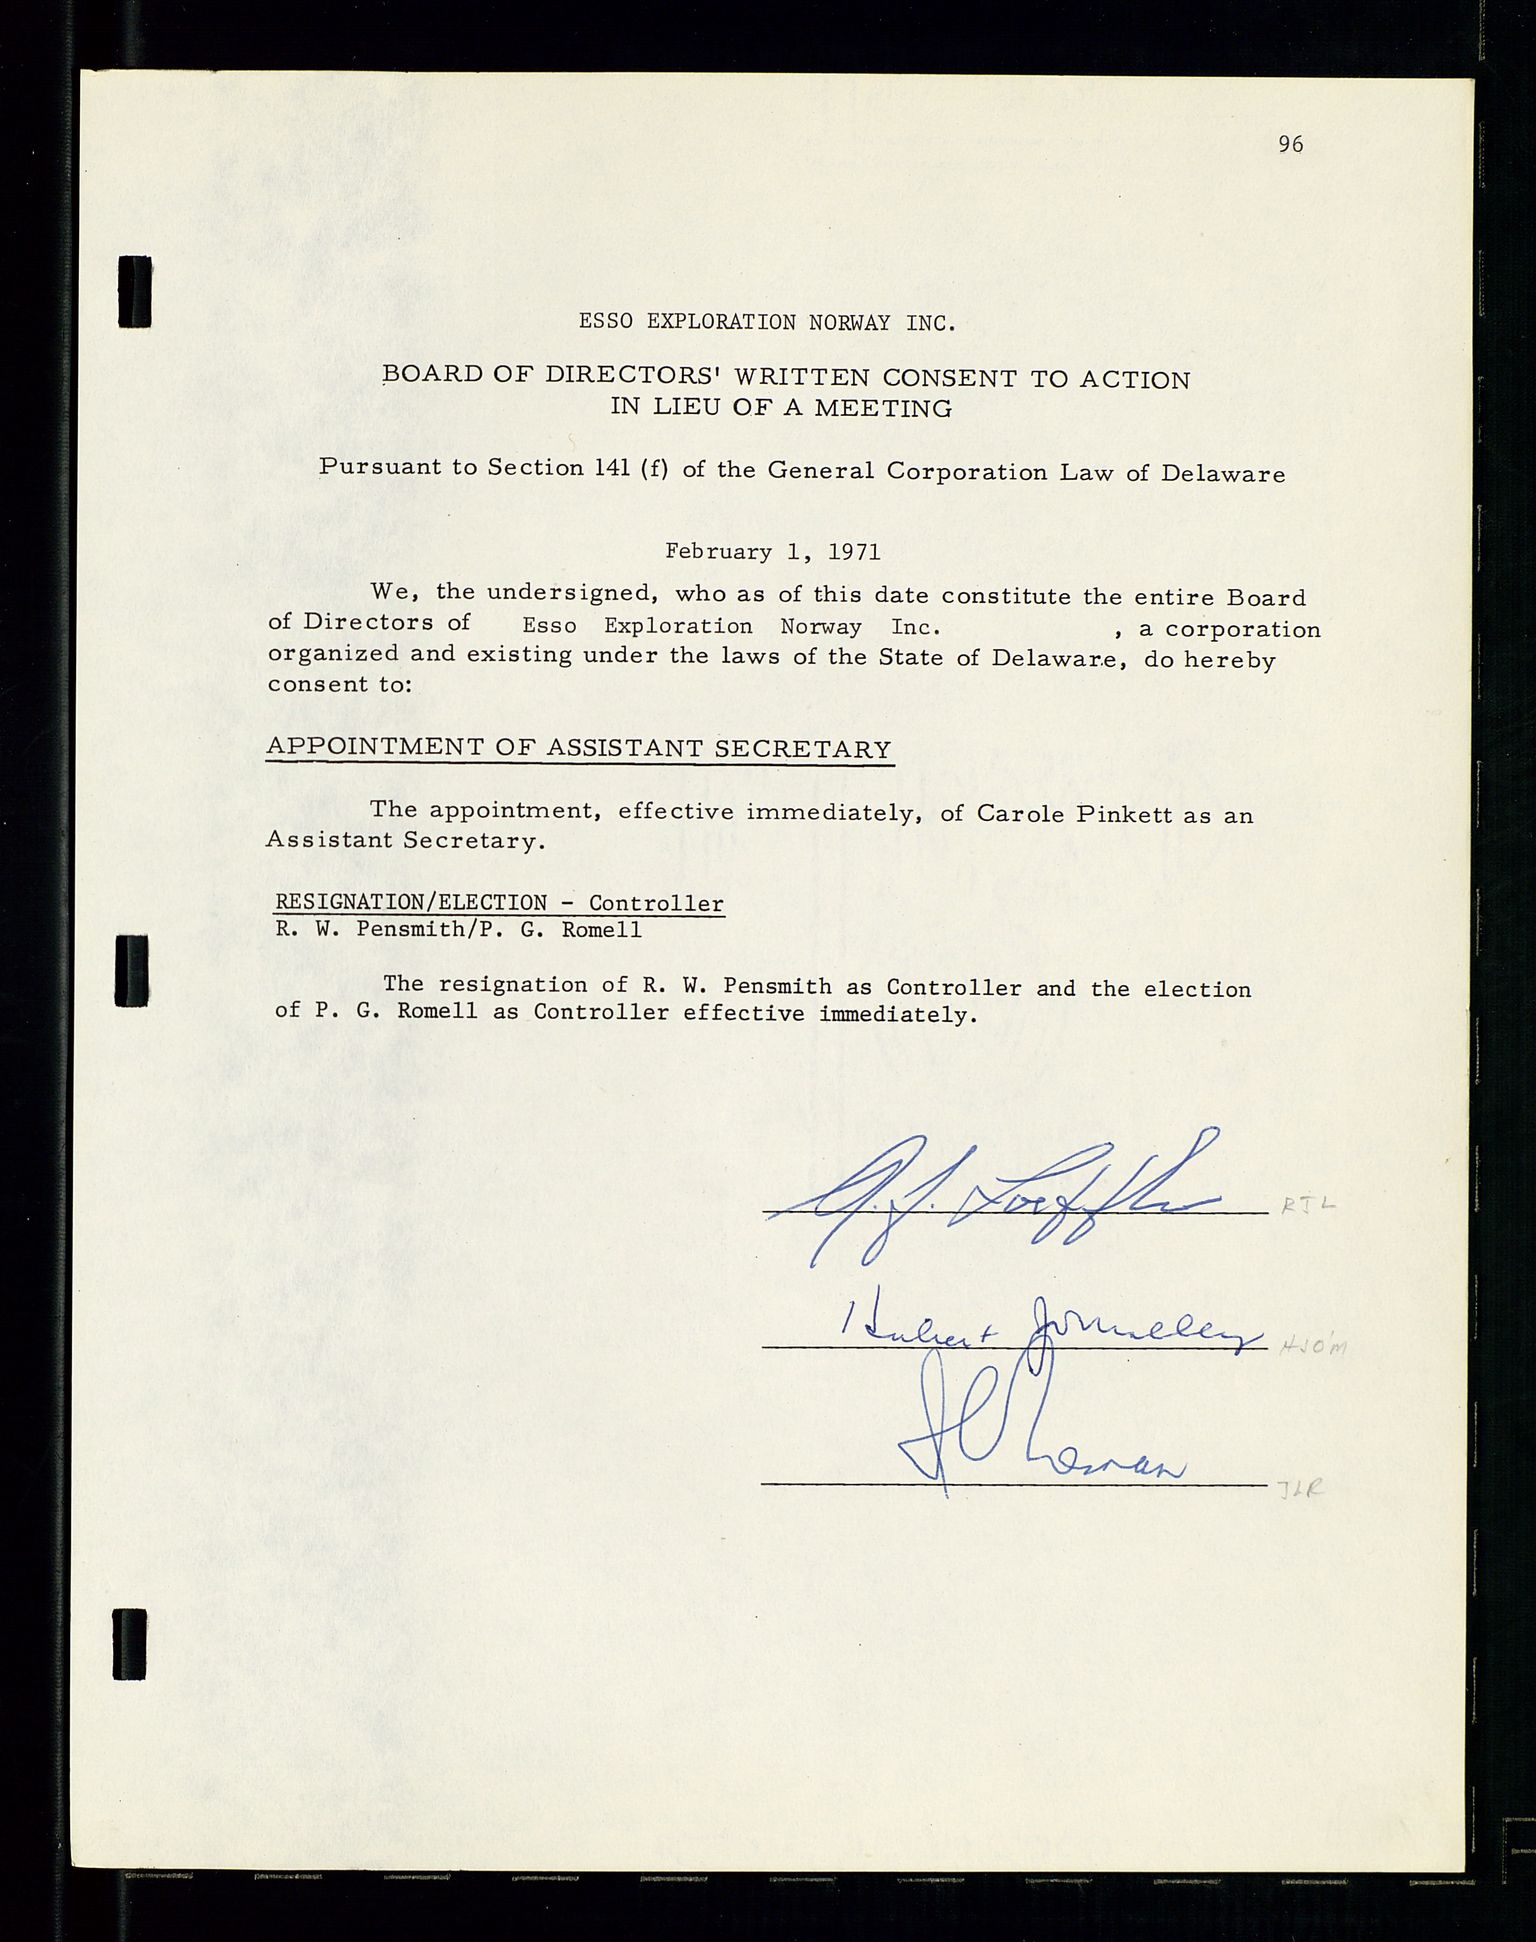 Pa 1512 - Esso Exploration and Production Norway Inc., SAST/A-101917/A/Aa/L0001/0001: Styredokumenter / Corporate records, By-Laws, Board meeting minutes, Incorporations, 1965-1975, p. 96